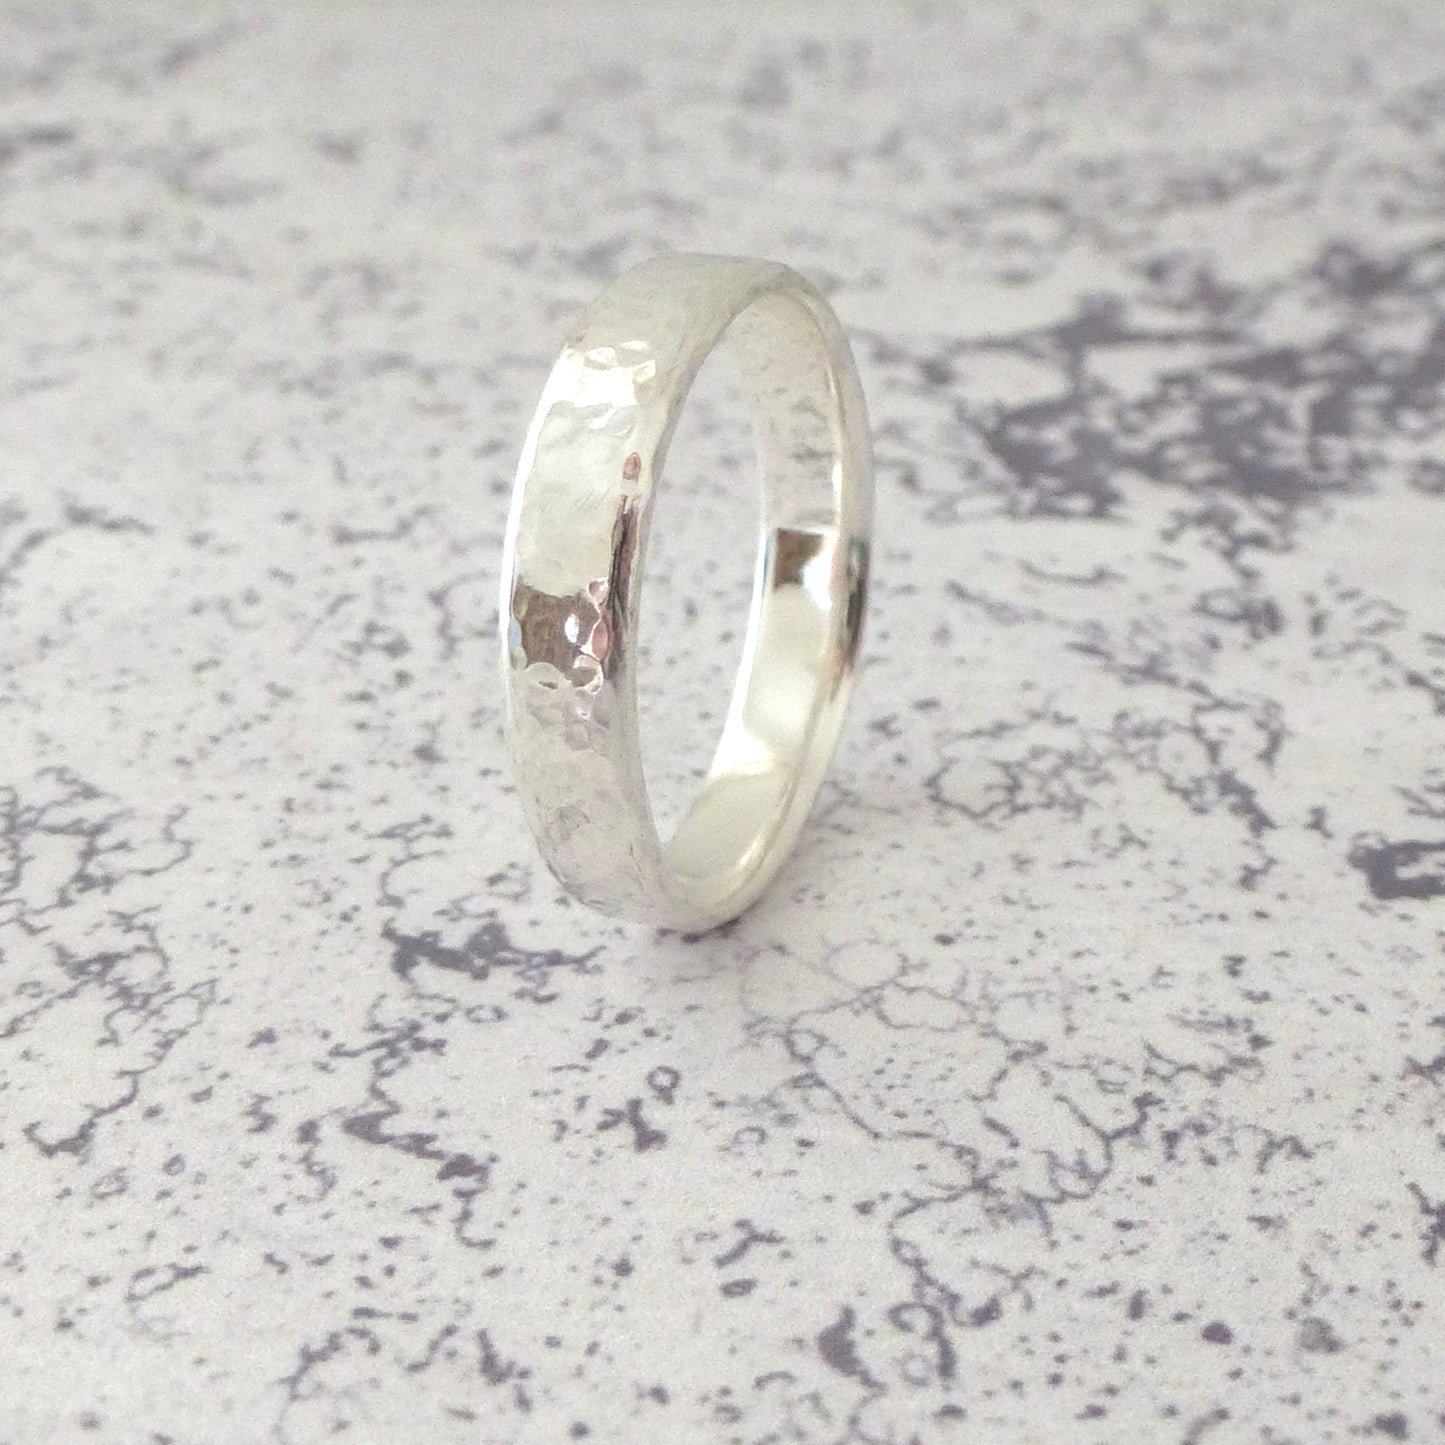 Hand Shaped Band Ring in Sterling Silver - 5mm - Hammered or Smooth